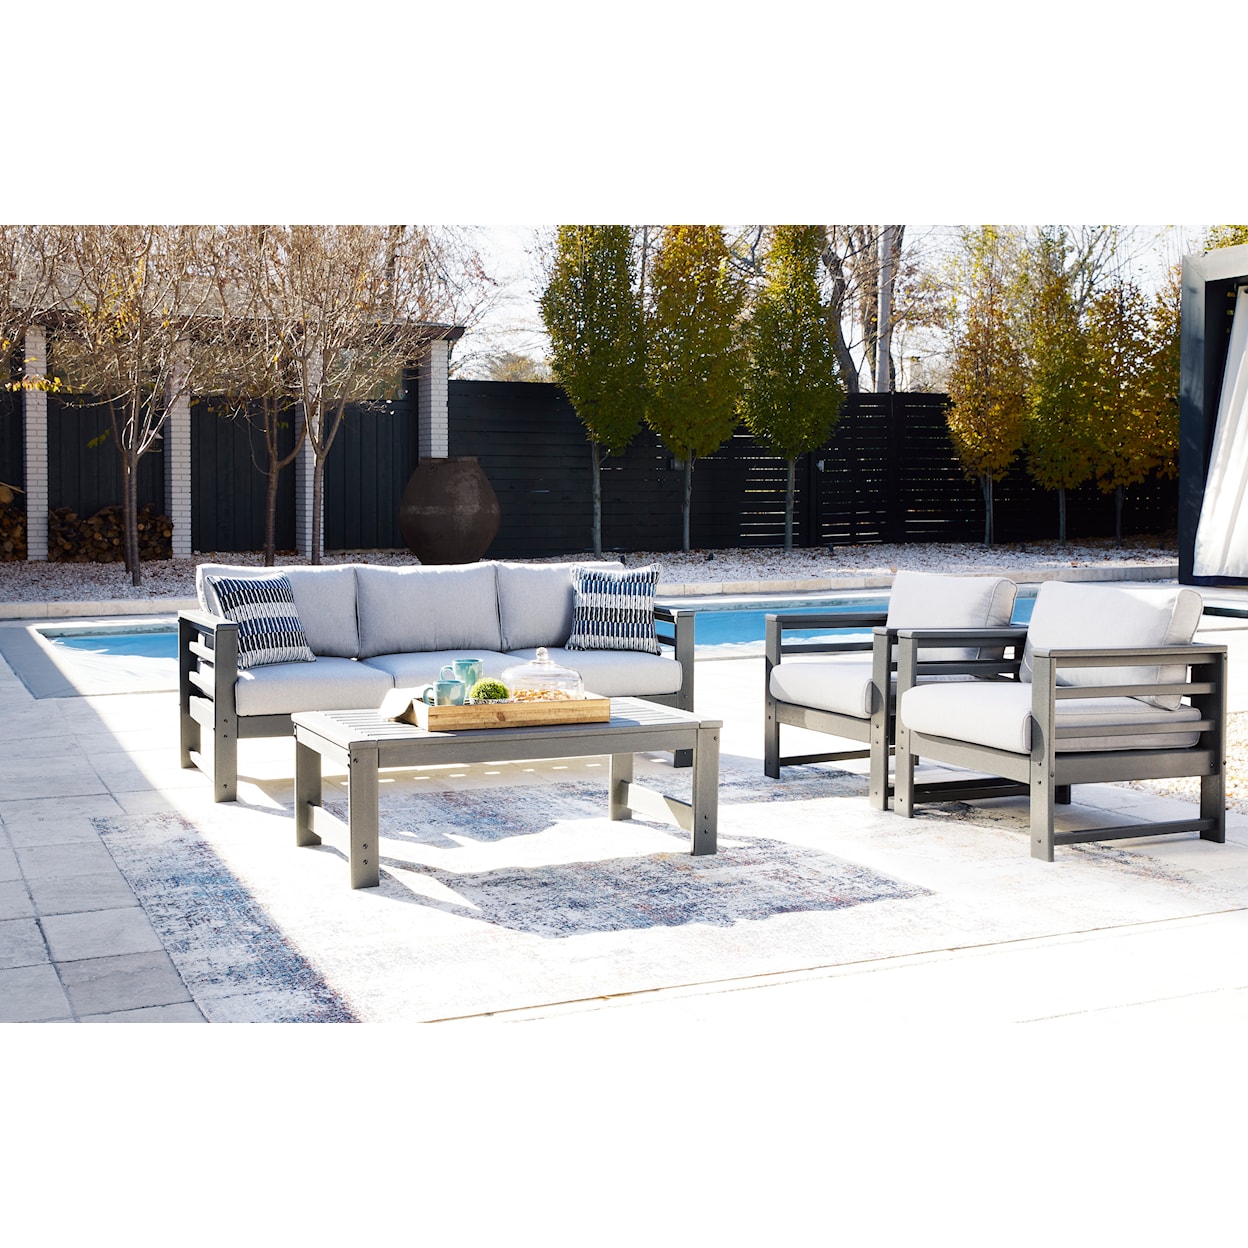 Michael Alan Select Amora Outdoor Lounge Chair with Cushion (Set of 2)